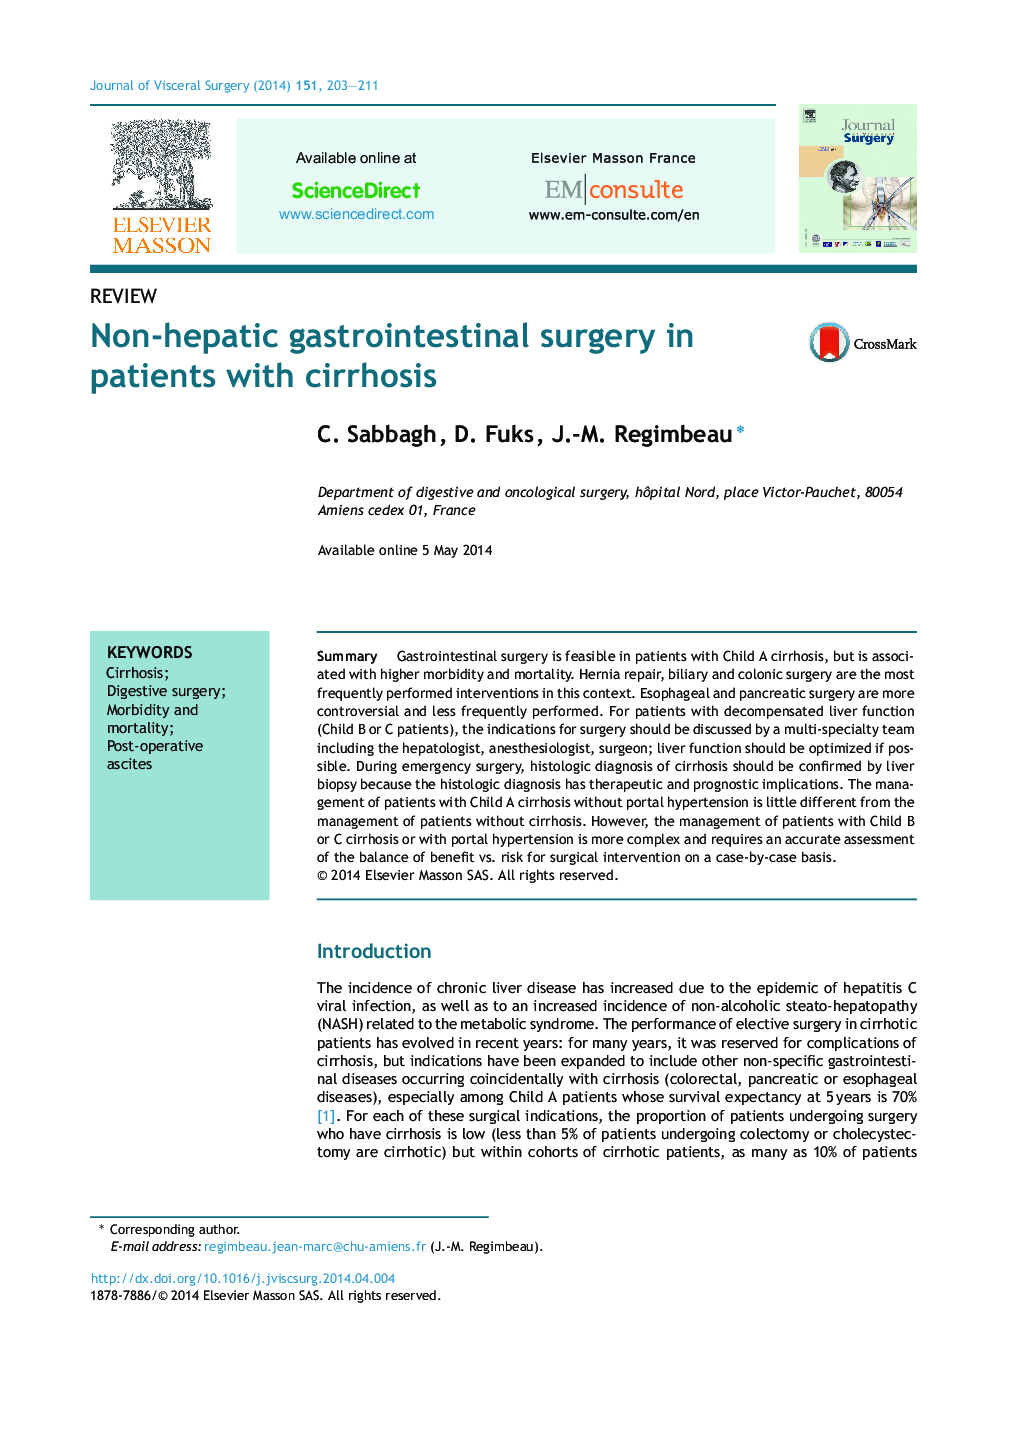 ReviewNon-hepatic gastrointestinal surgery in patients with cirrhosis